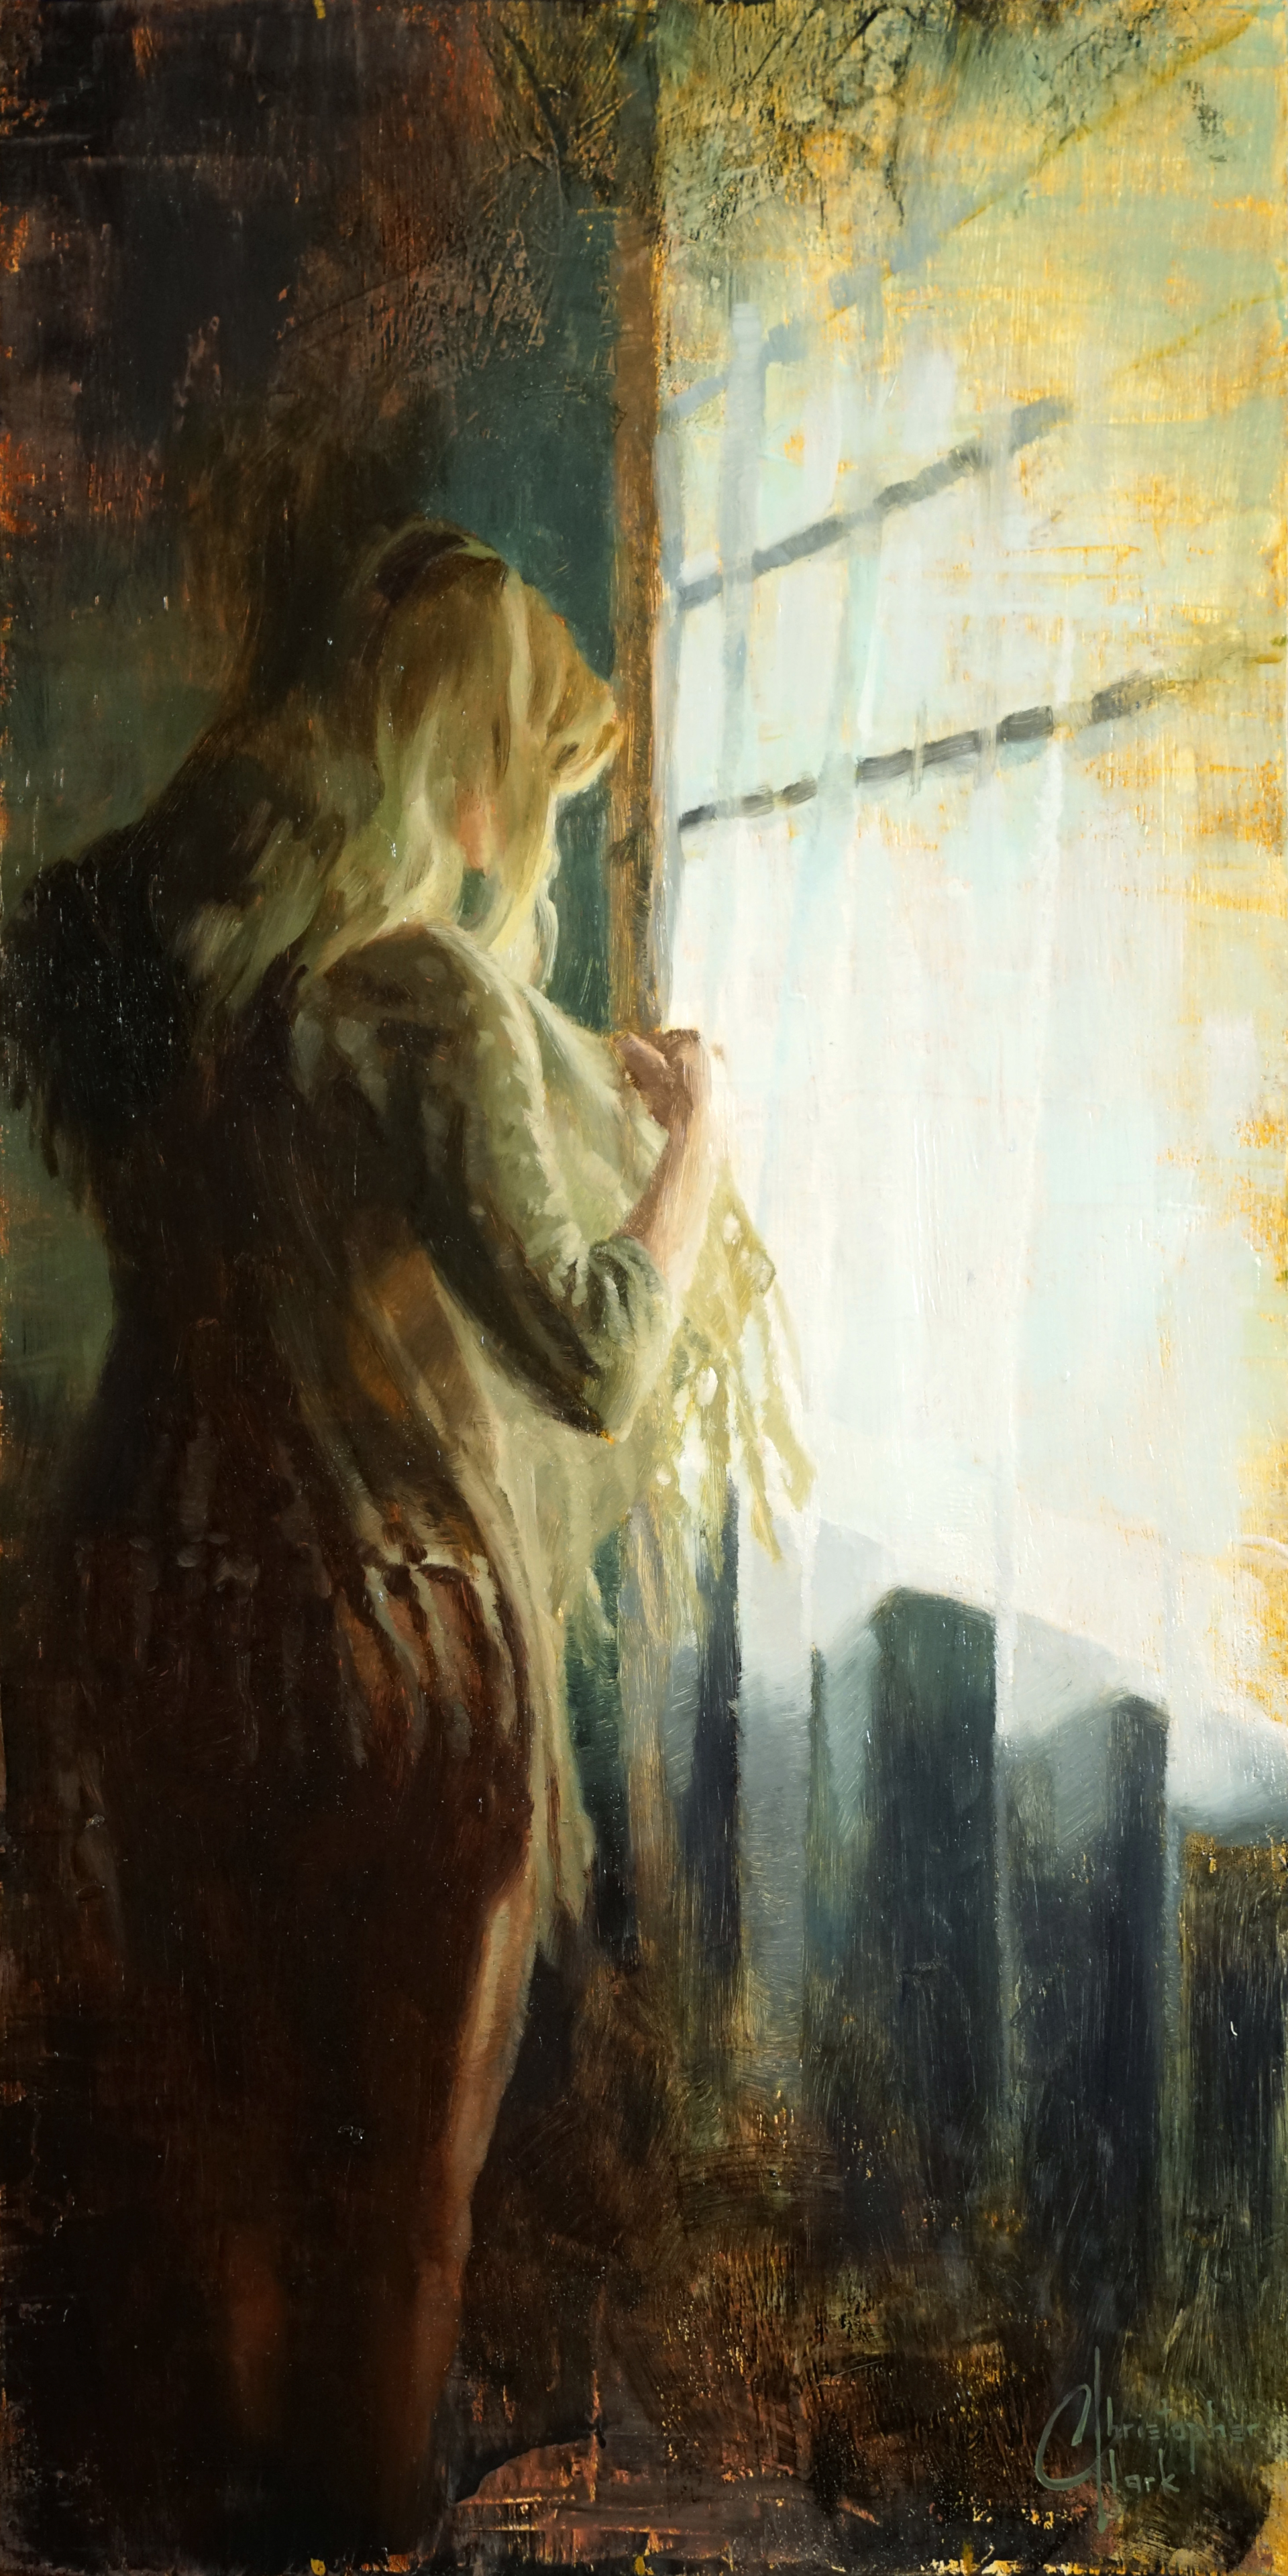 Light From the Window by Christopher Clark